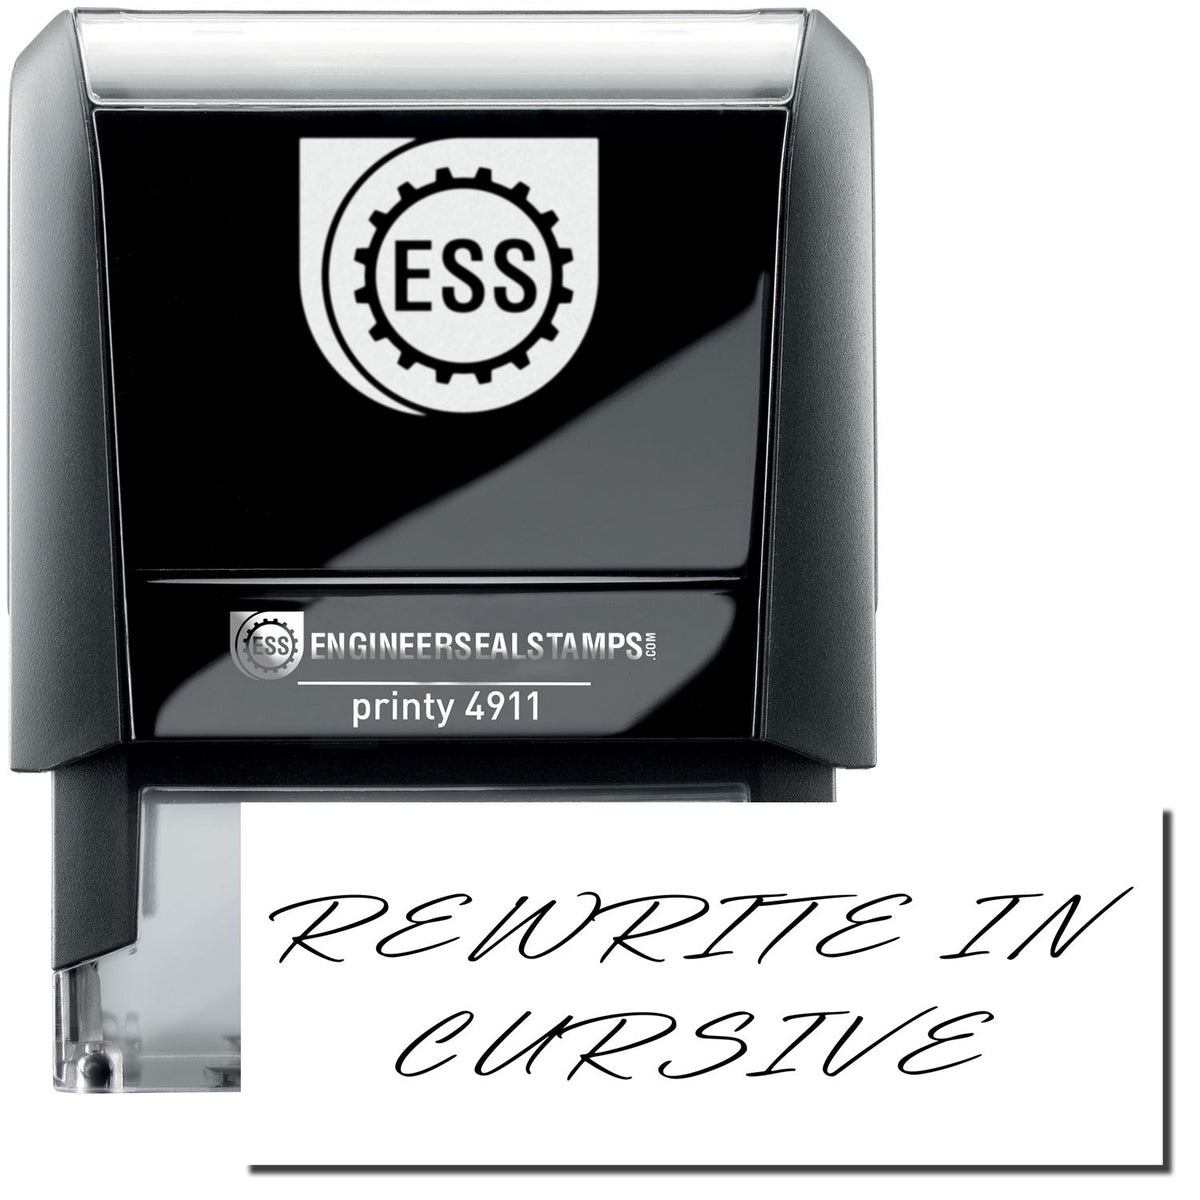 A self-inking stamp with a stamped image showing how the text &quot;REWRITE IN CURSIVE&quot; is displayed after stamping.